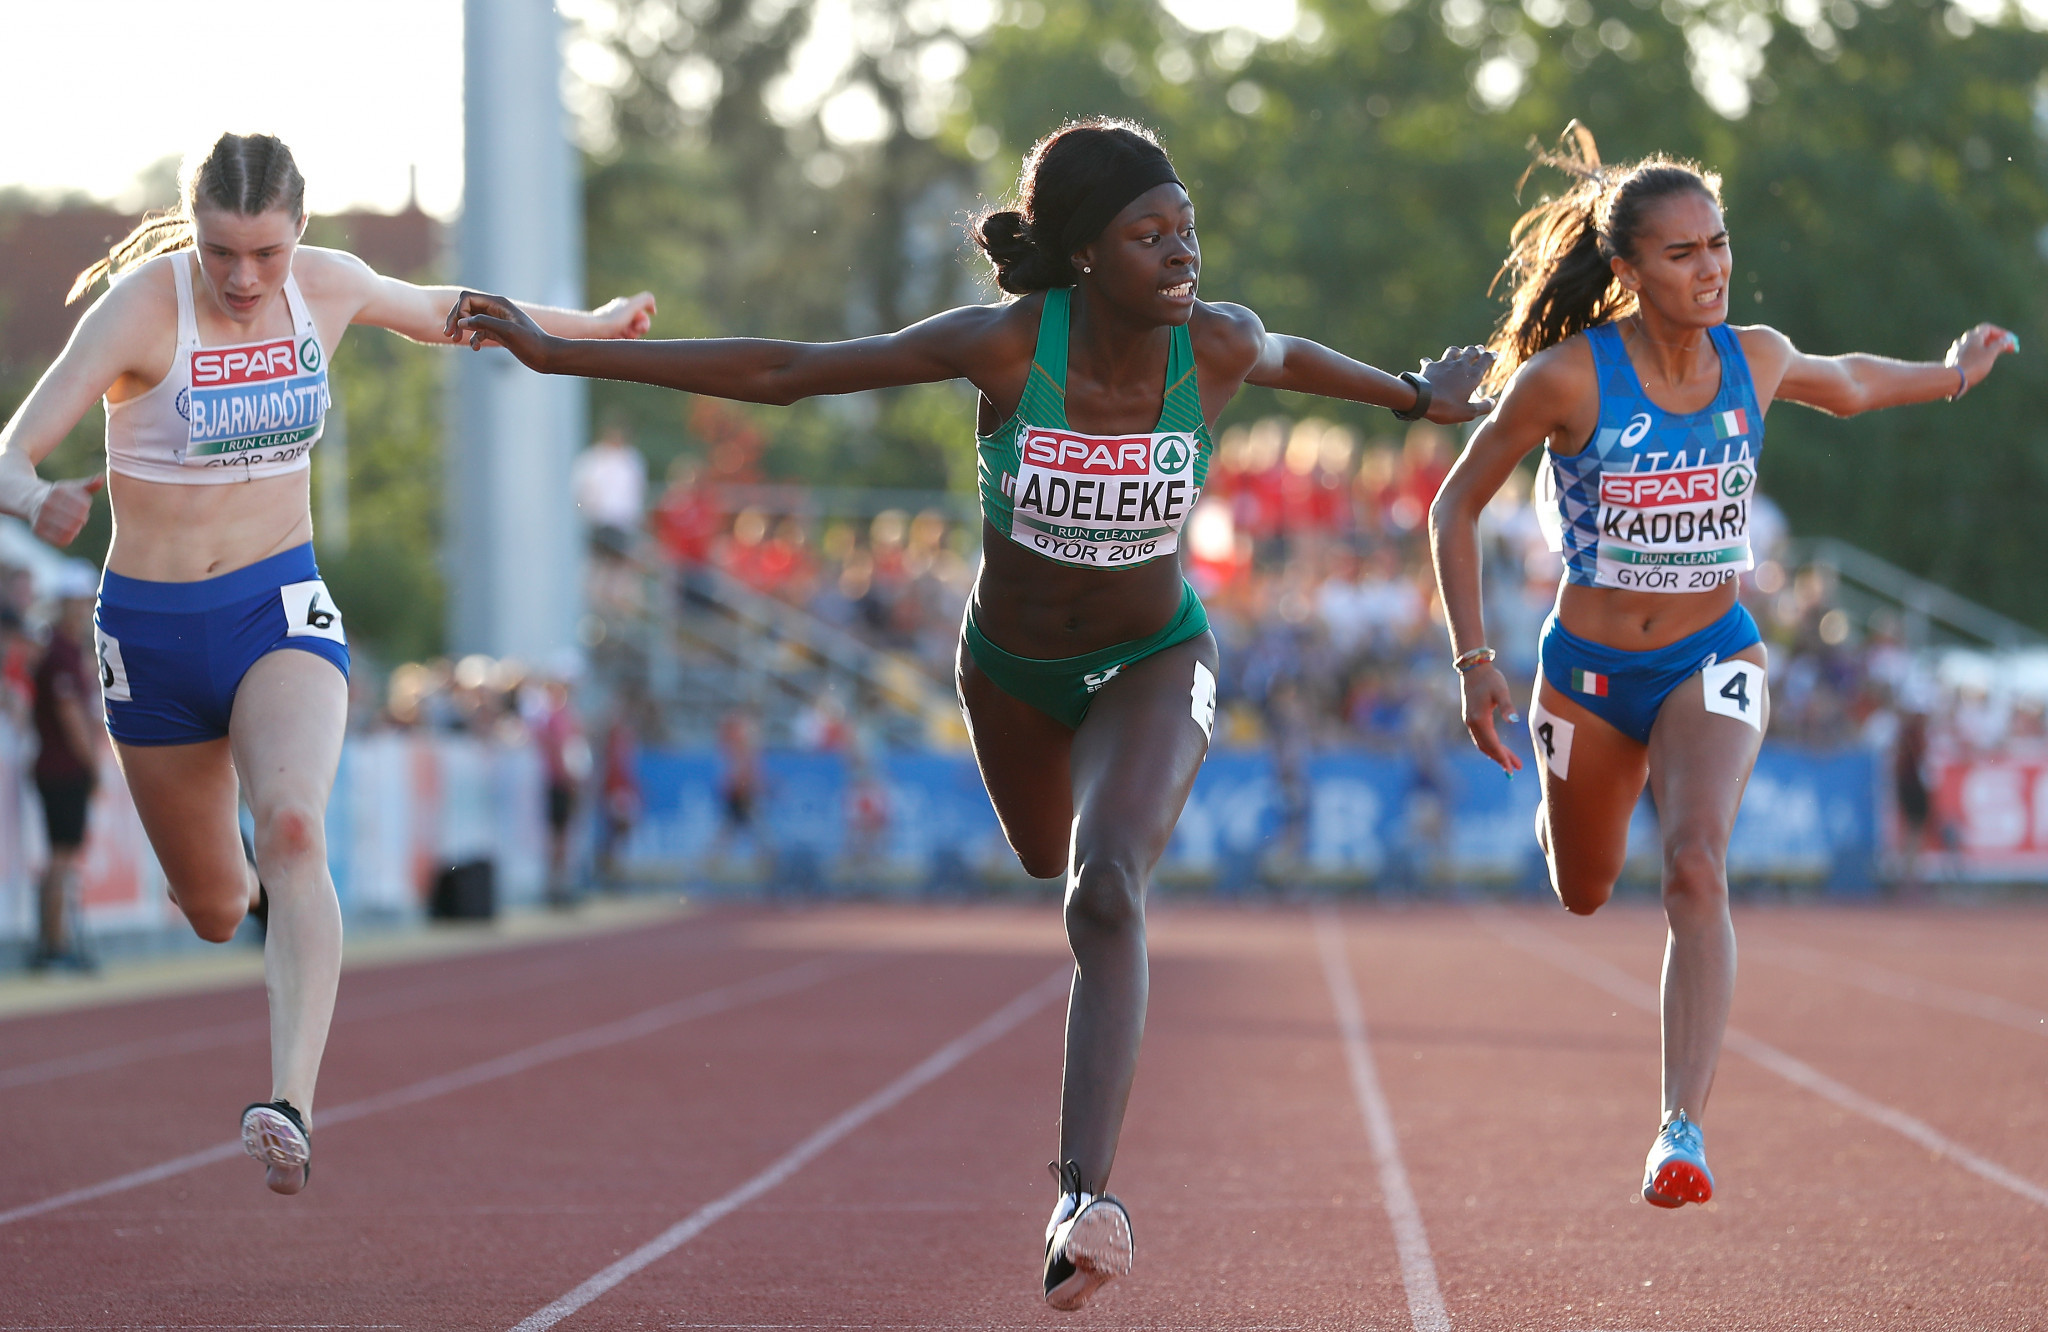 Ireland’s Adeleke completes sprint double at Summer European Youth Olympic Festival in Baku